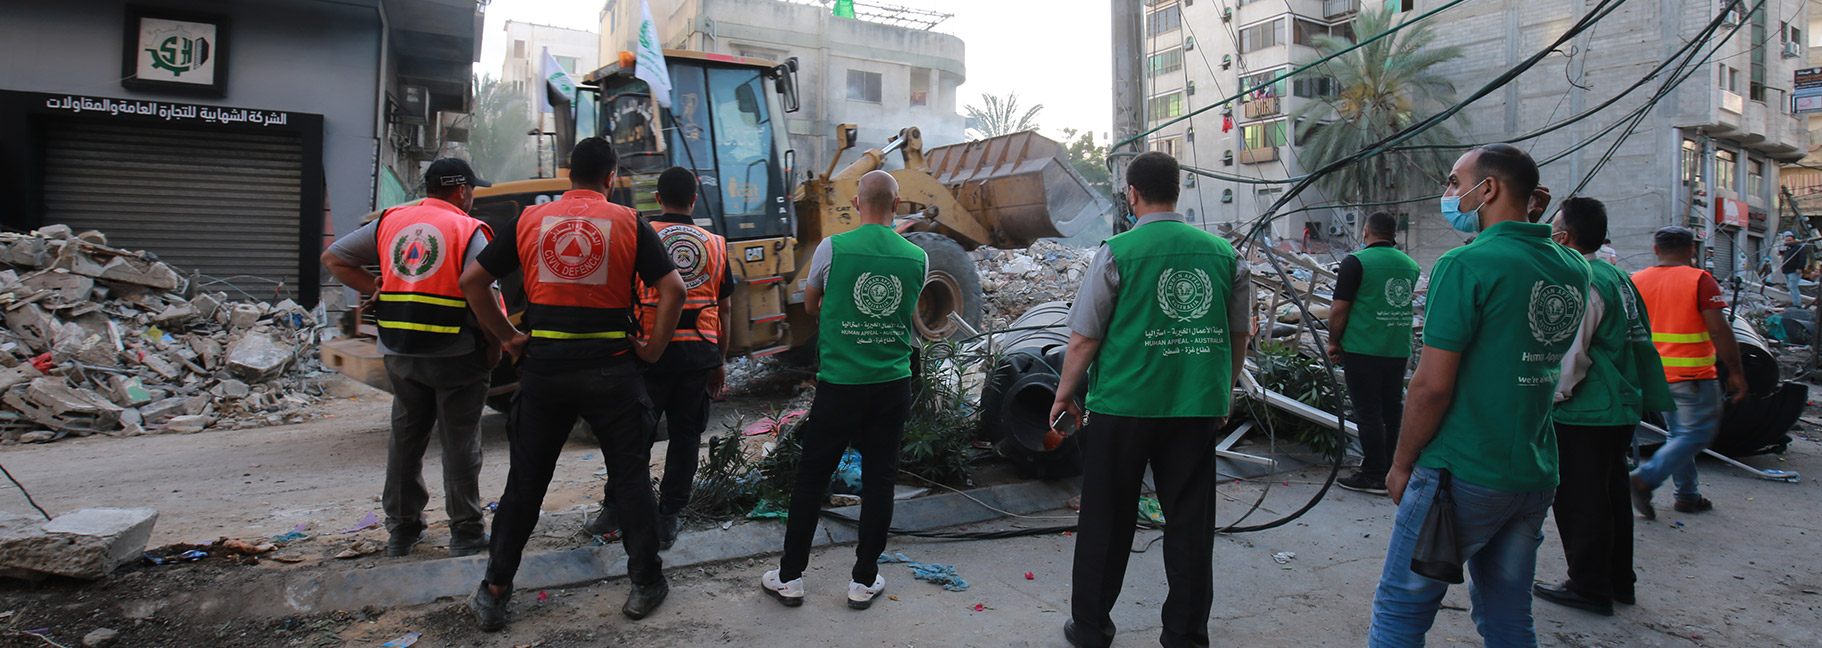 Human Appeal Field Workers Cooperating With Civil Defense Command To Clear Rubble In Gaza